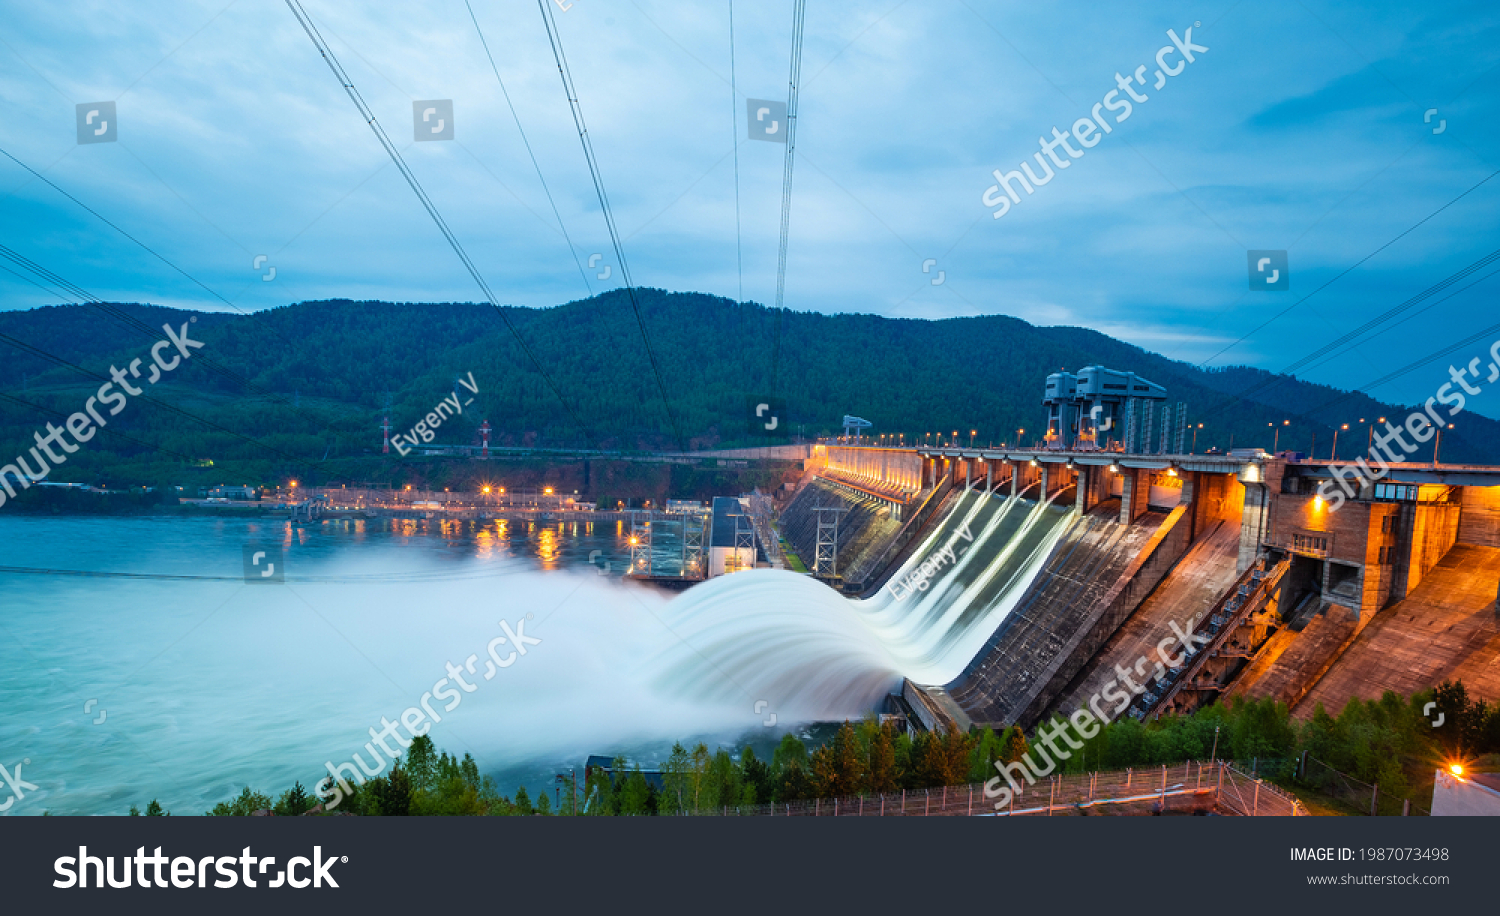 view of the hydroelectric dam, water discharge through locks, long exposure shooting #1987073498